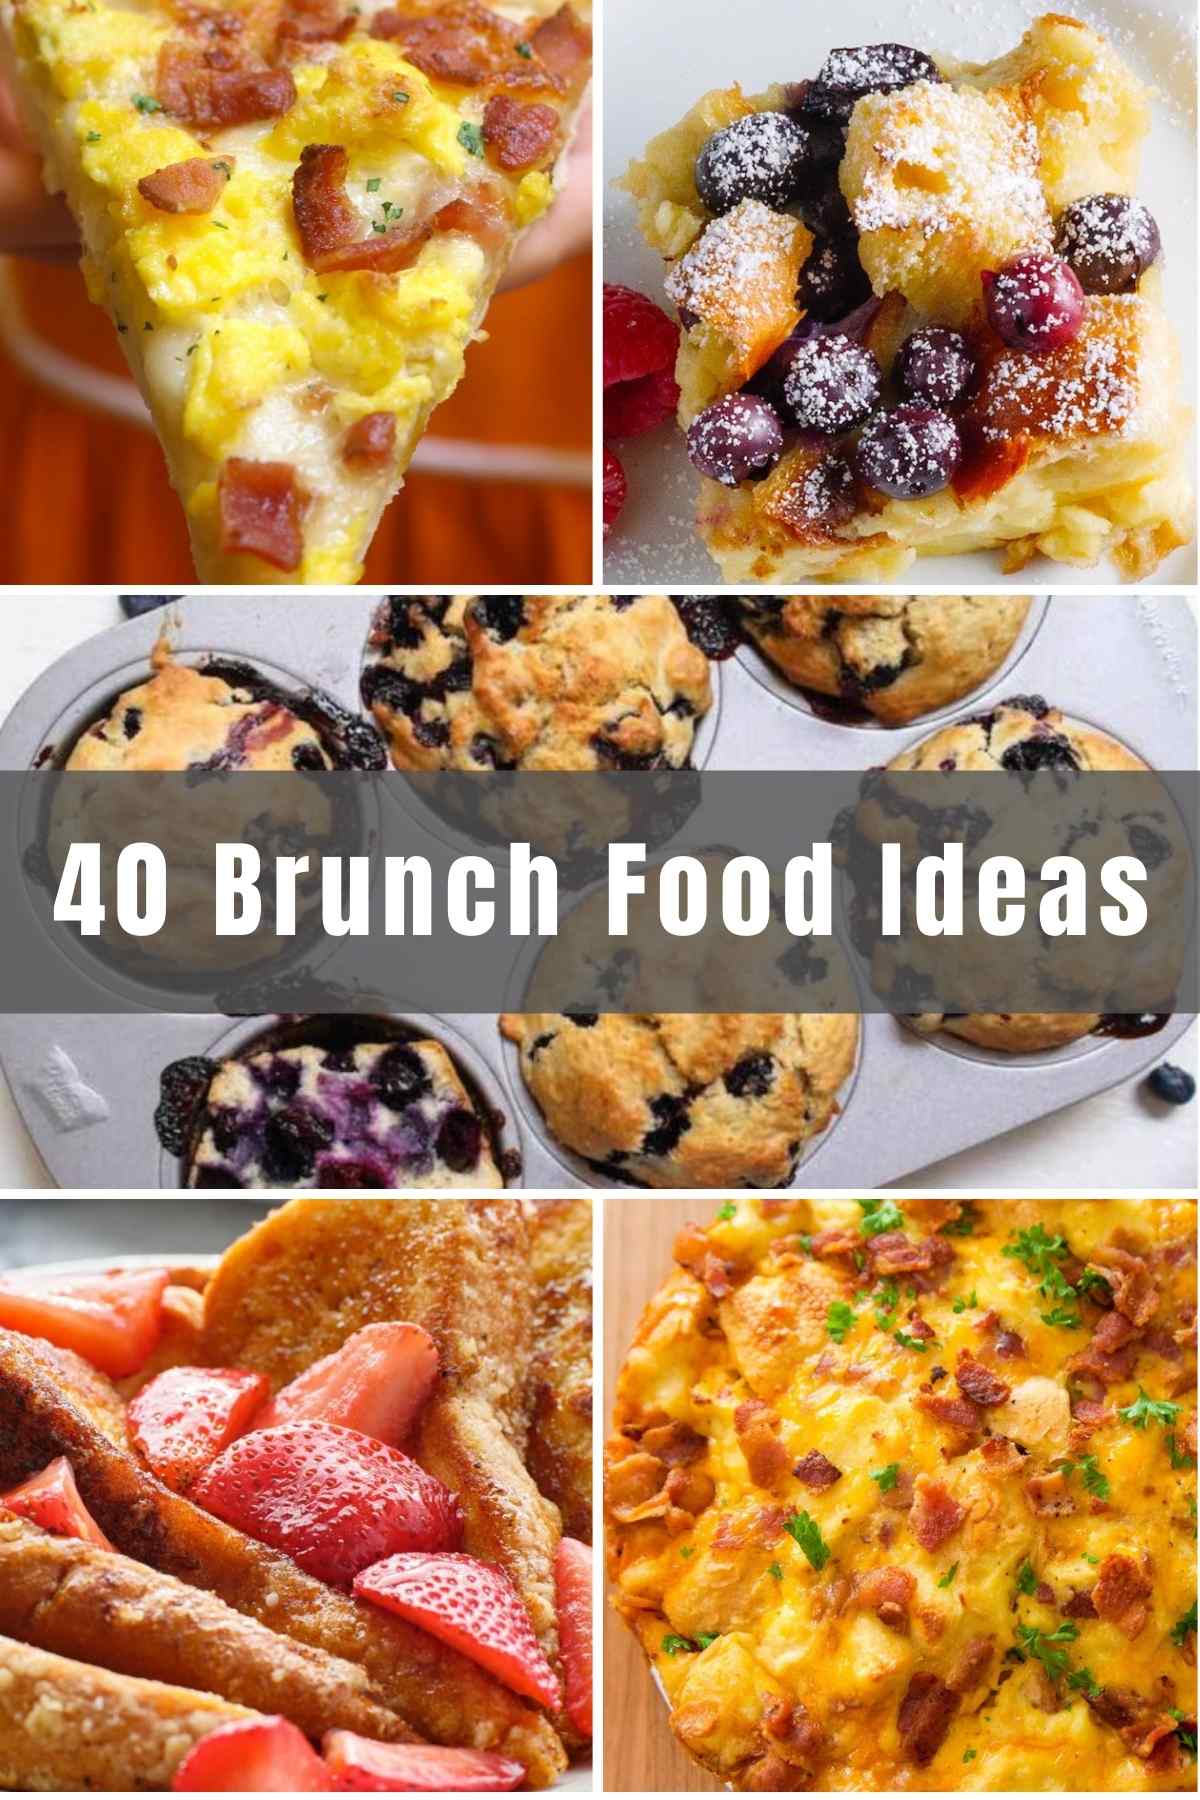 If you have a special occasion coming up, or simply want to spoil yourself, take a look at this collection of 40 of the Best Brunch Food Ideas. From delectable Belgian waffles to baked breakfast donuts, you’re sure to find a recipe you’ll love!